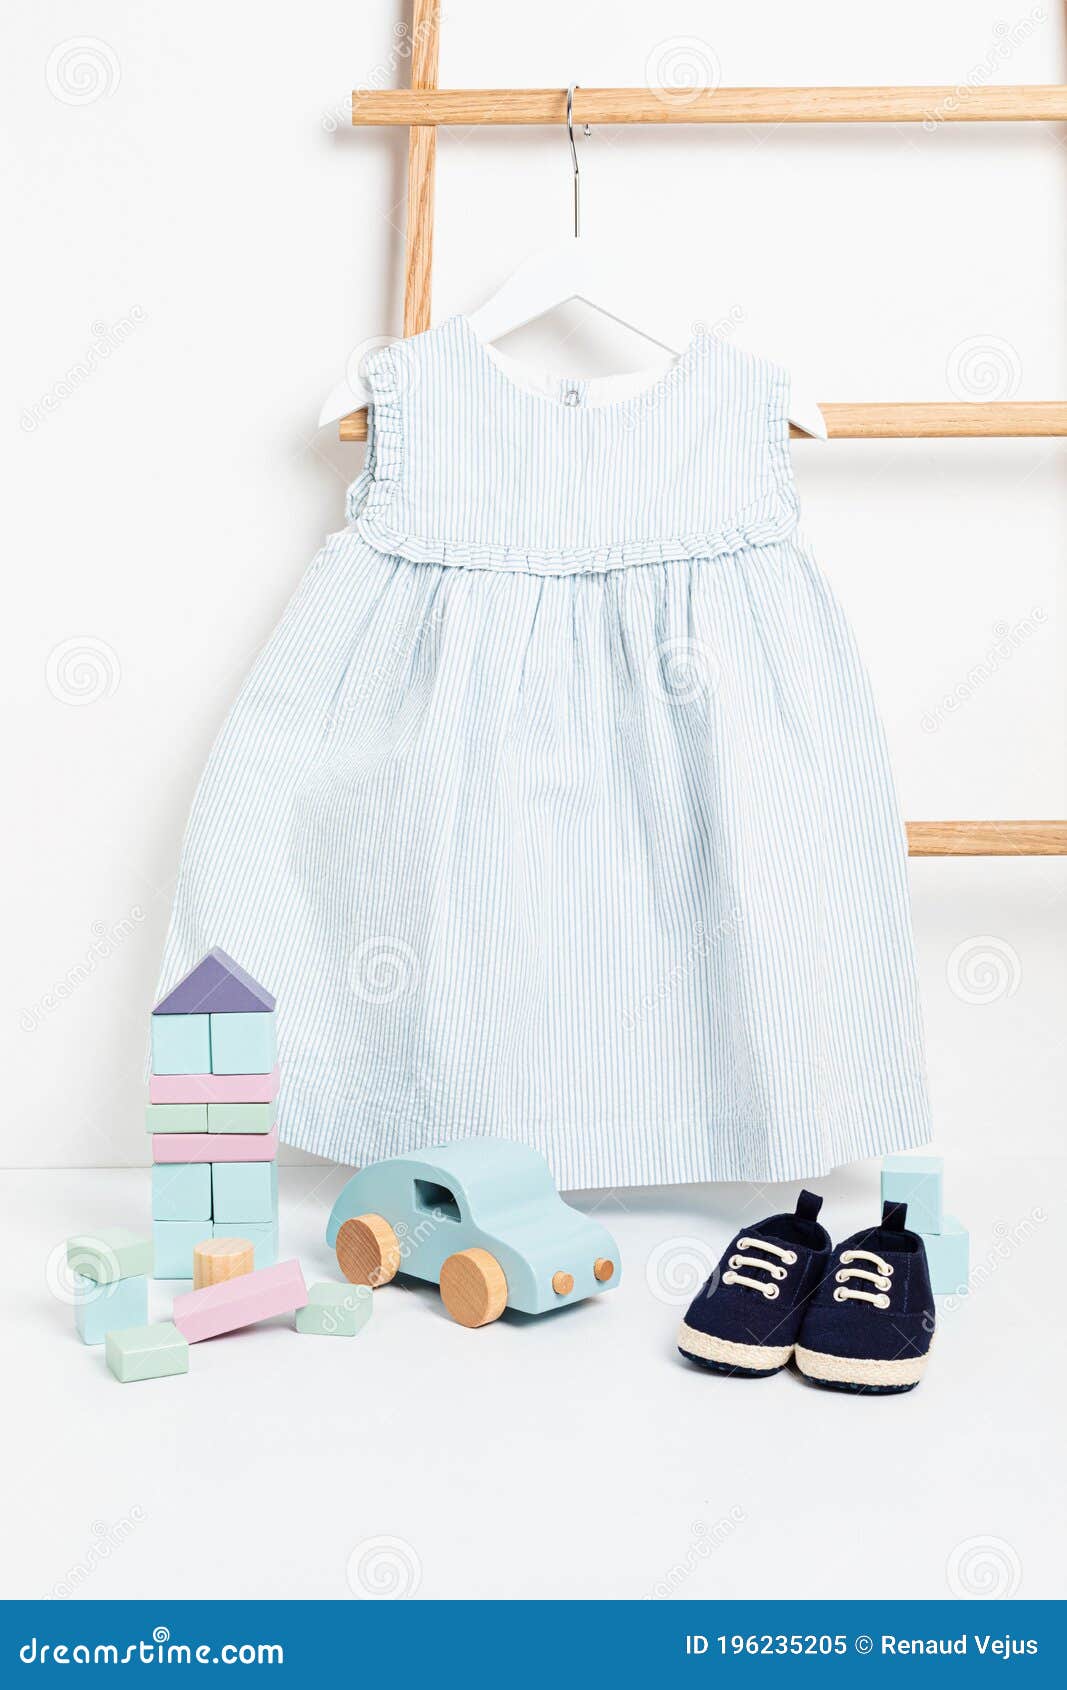 Cute Baby Clothes Hanging on the Rack Stock Image - Image of style ...